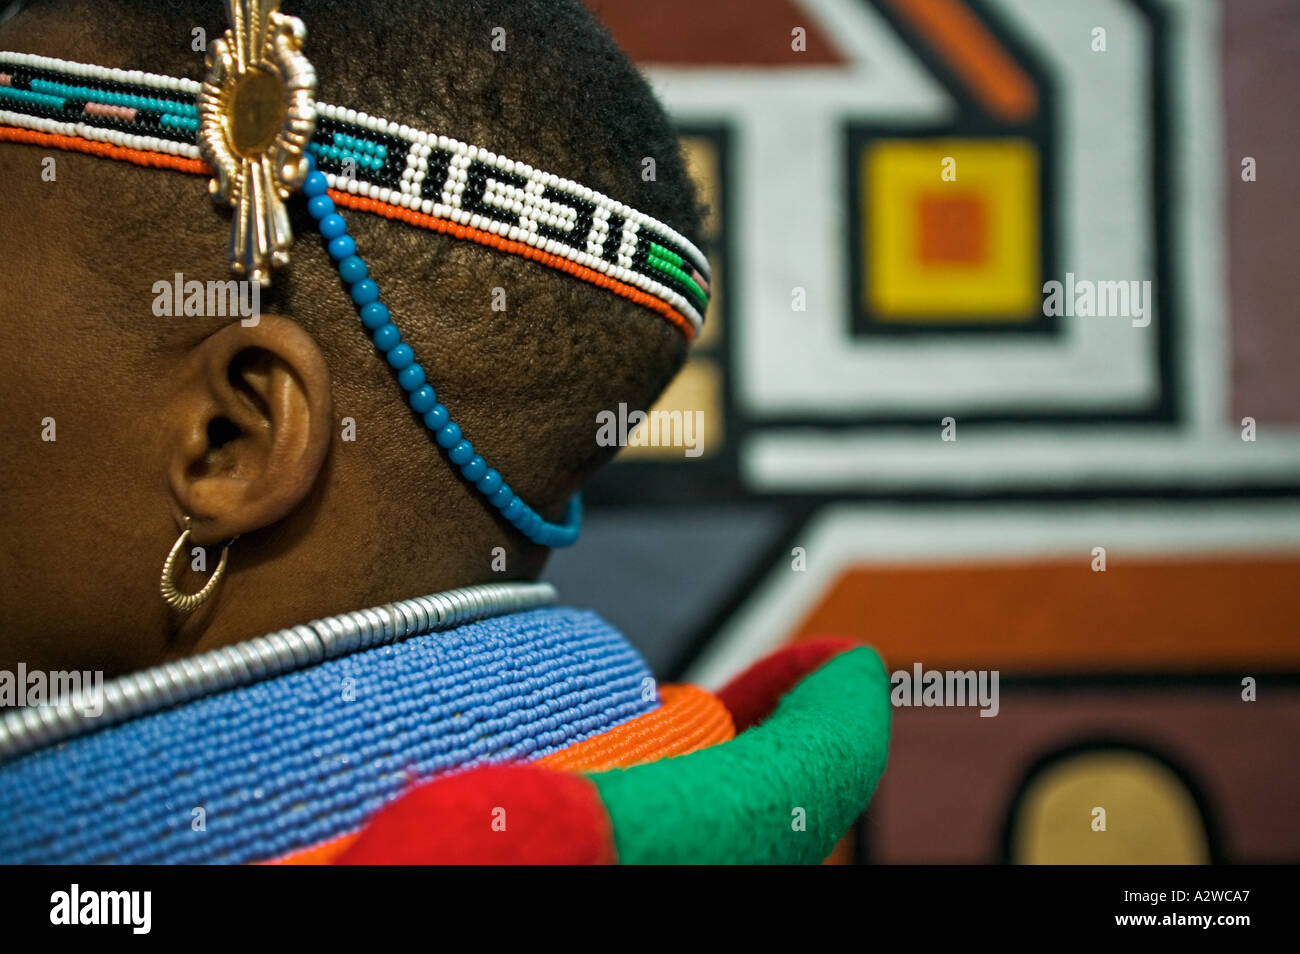 Ndebele woman dressed in traditional costume Married woman Traditional geometric wall paintings in background South Africa Stock Photo